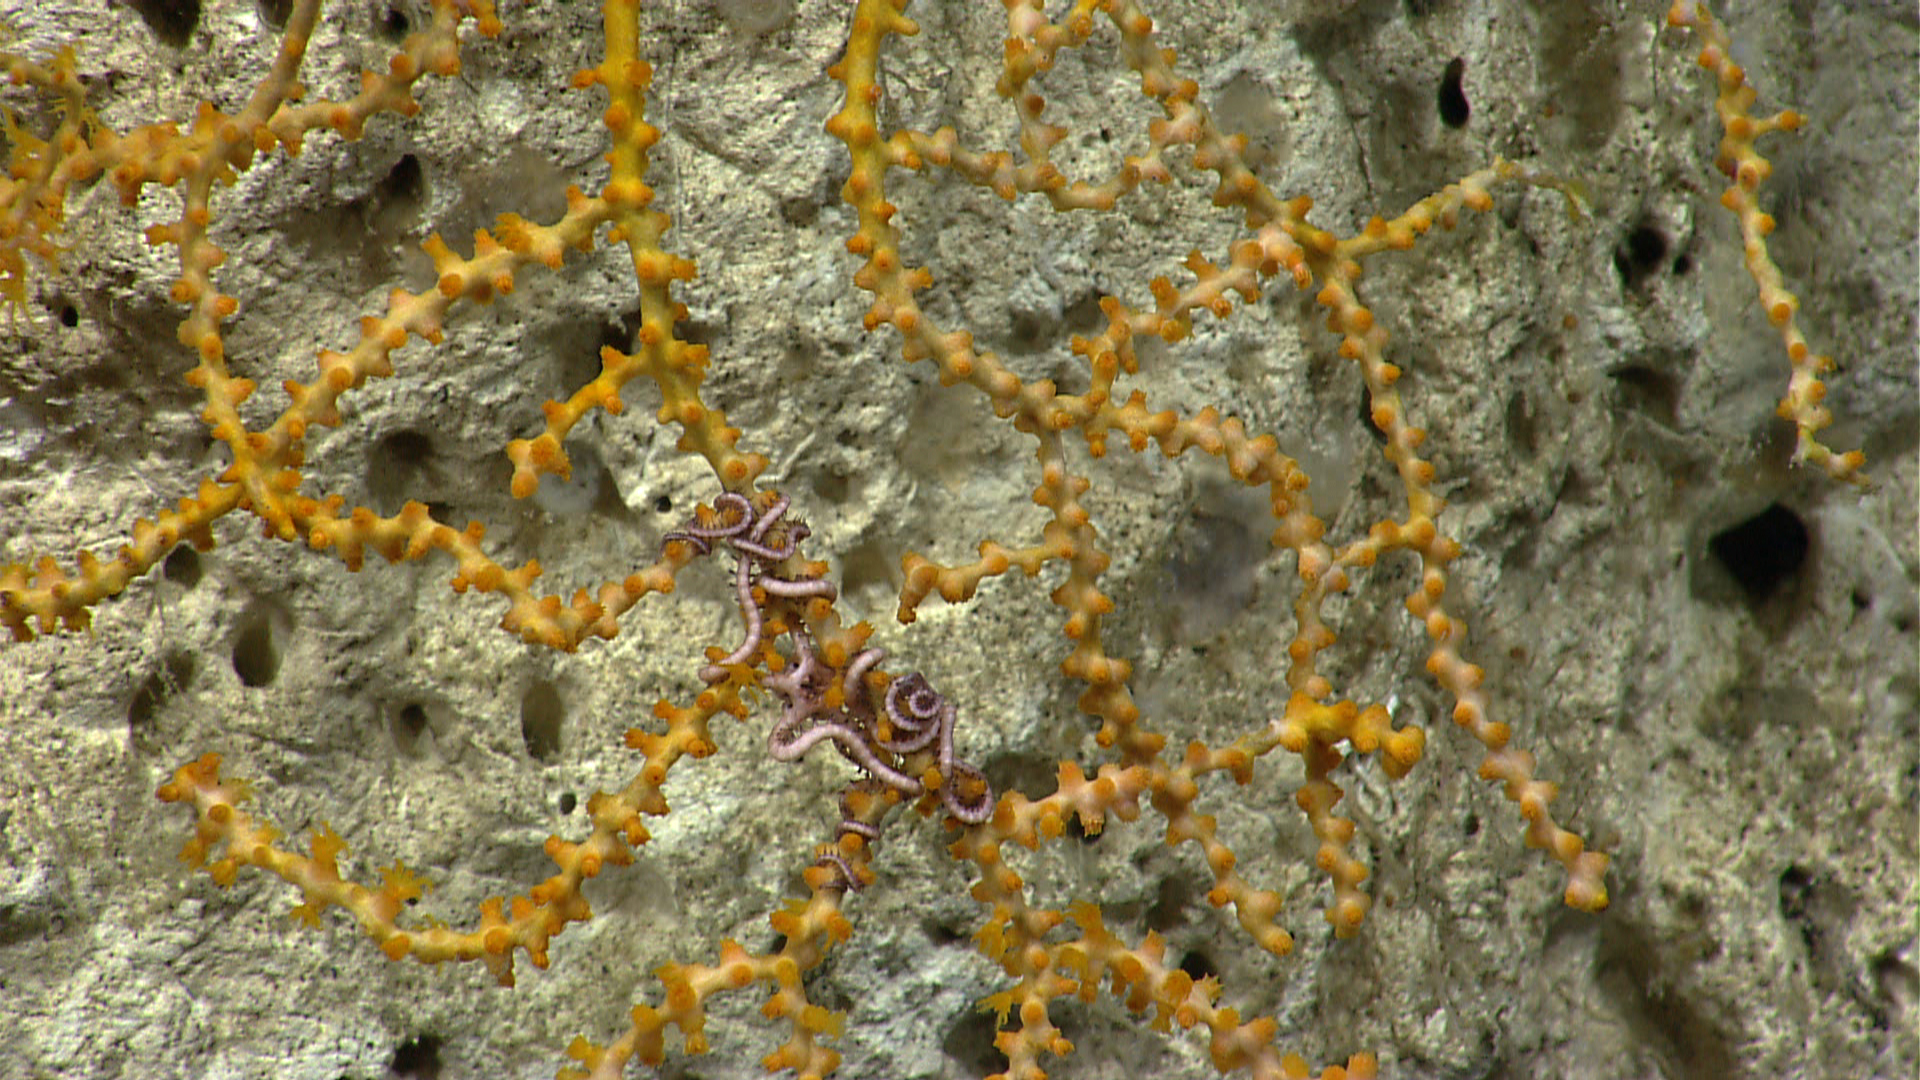 Photograph of a deep-sea healthy coral with brittle star coiled around its branches.